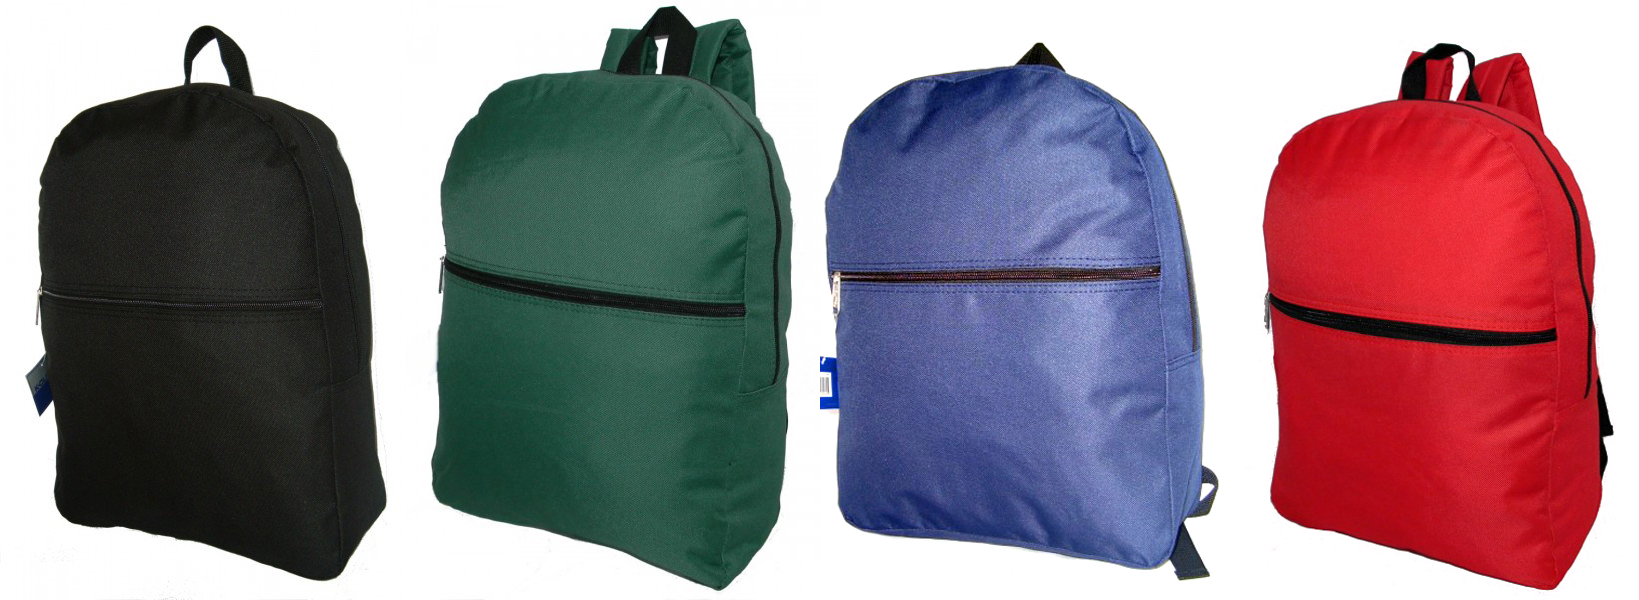 ''17'''' Classic BACKPACKs - Choose Your Color(s)''